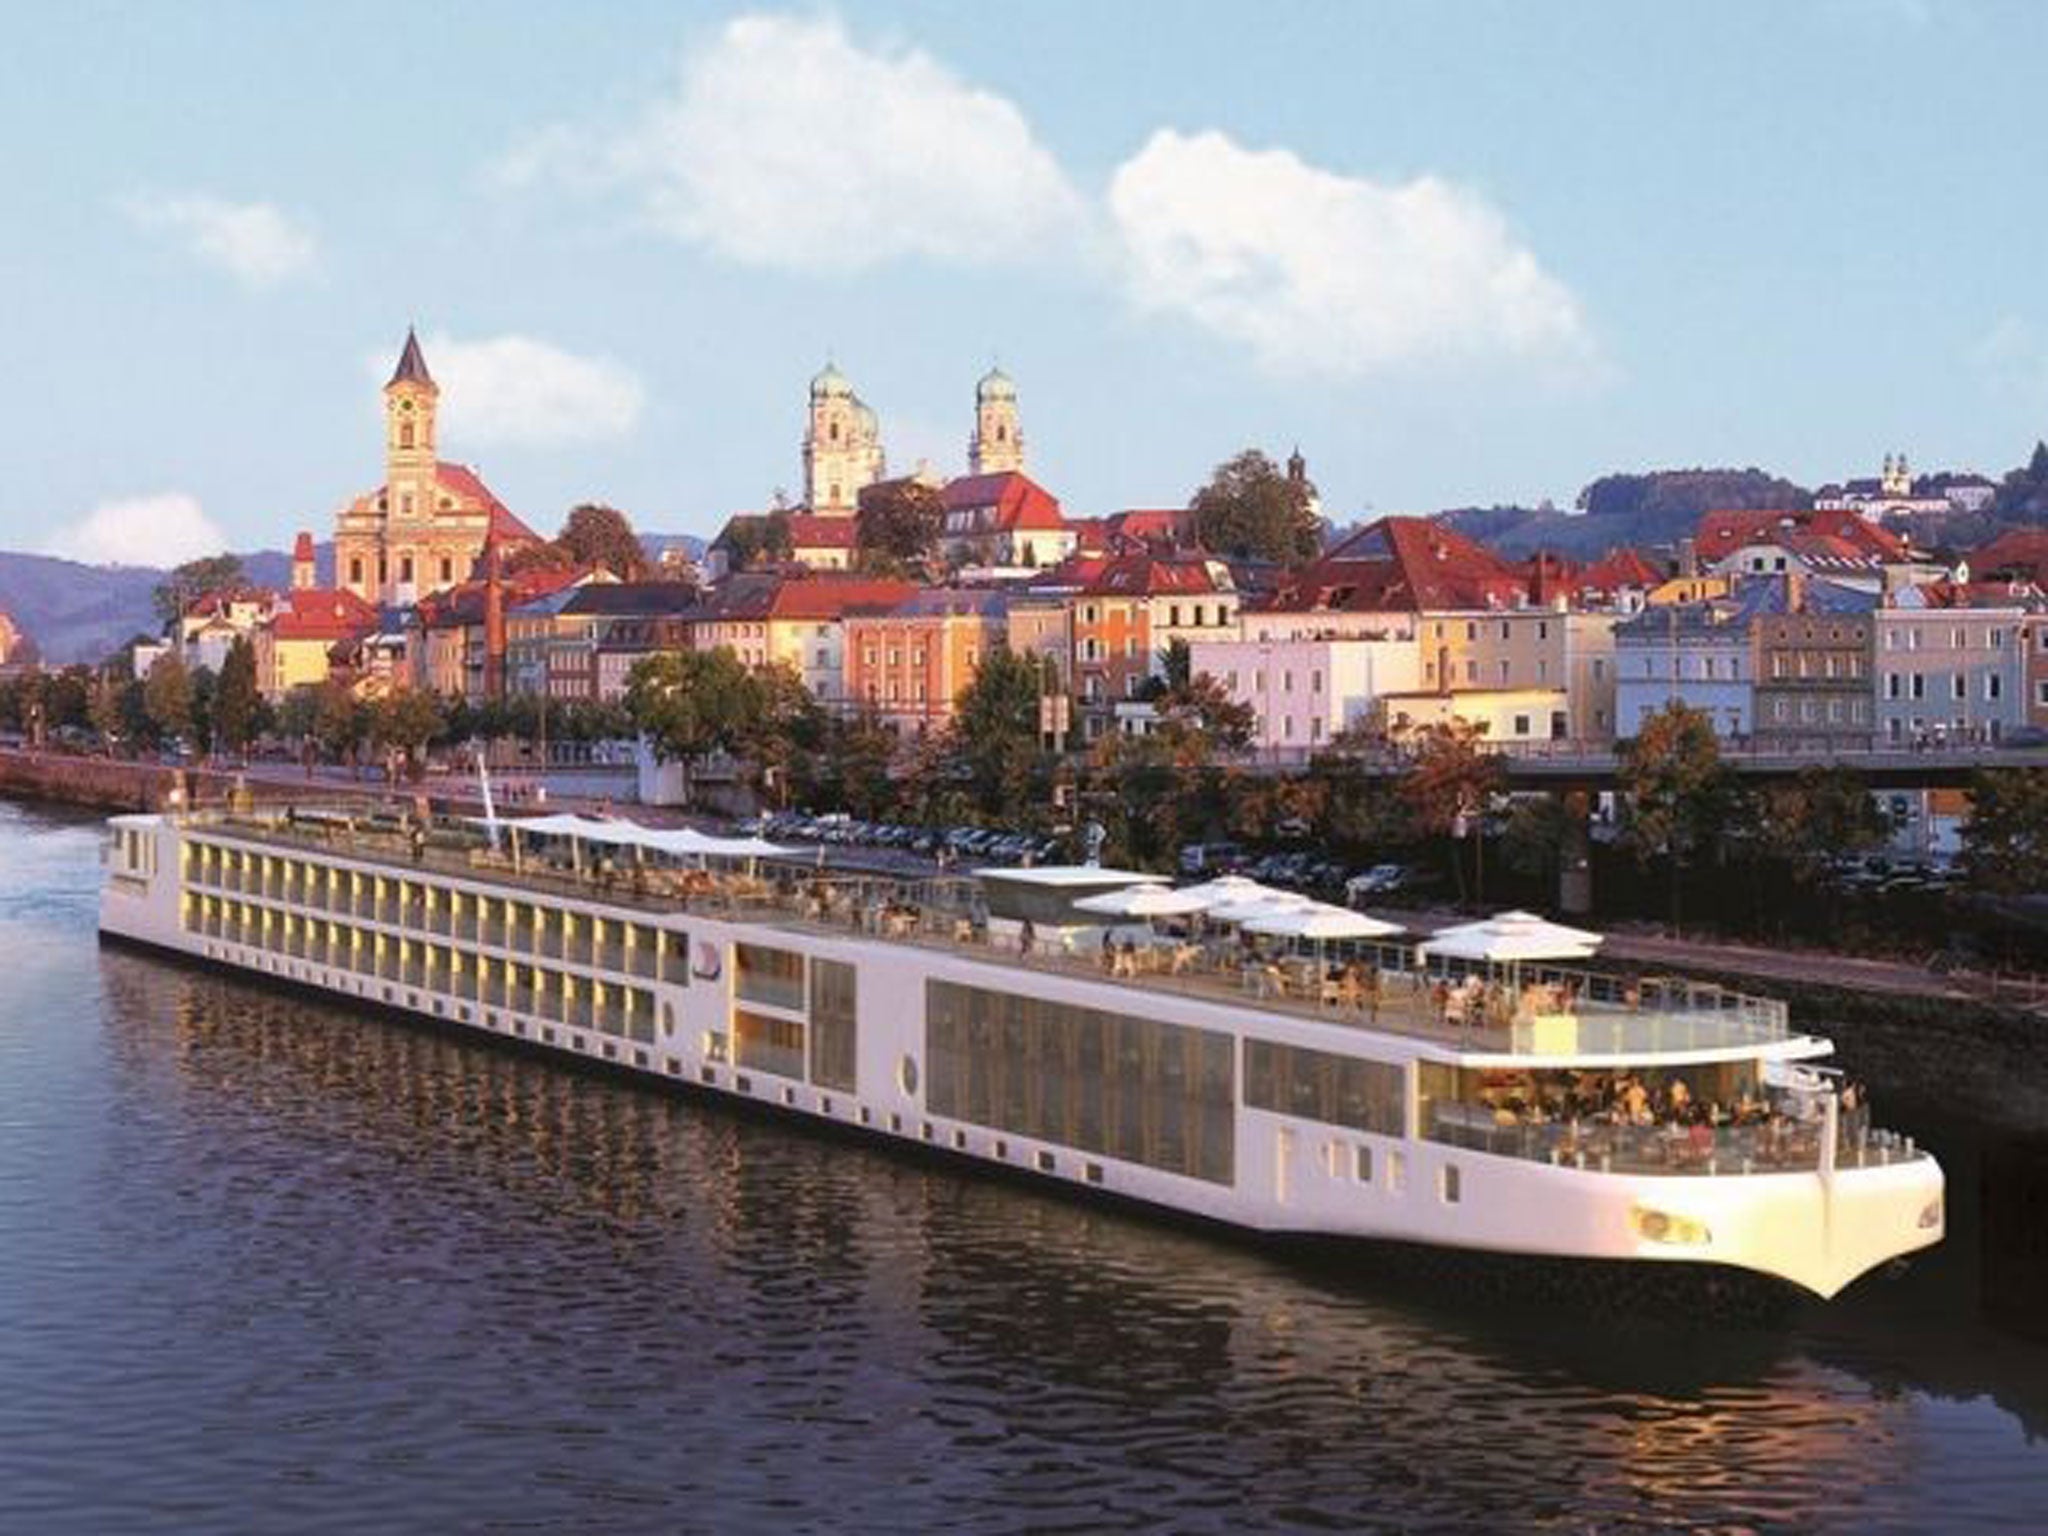 Ripple effect: A Viking River Cruises vessel on the Danube